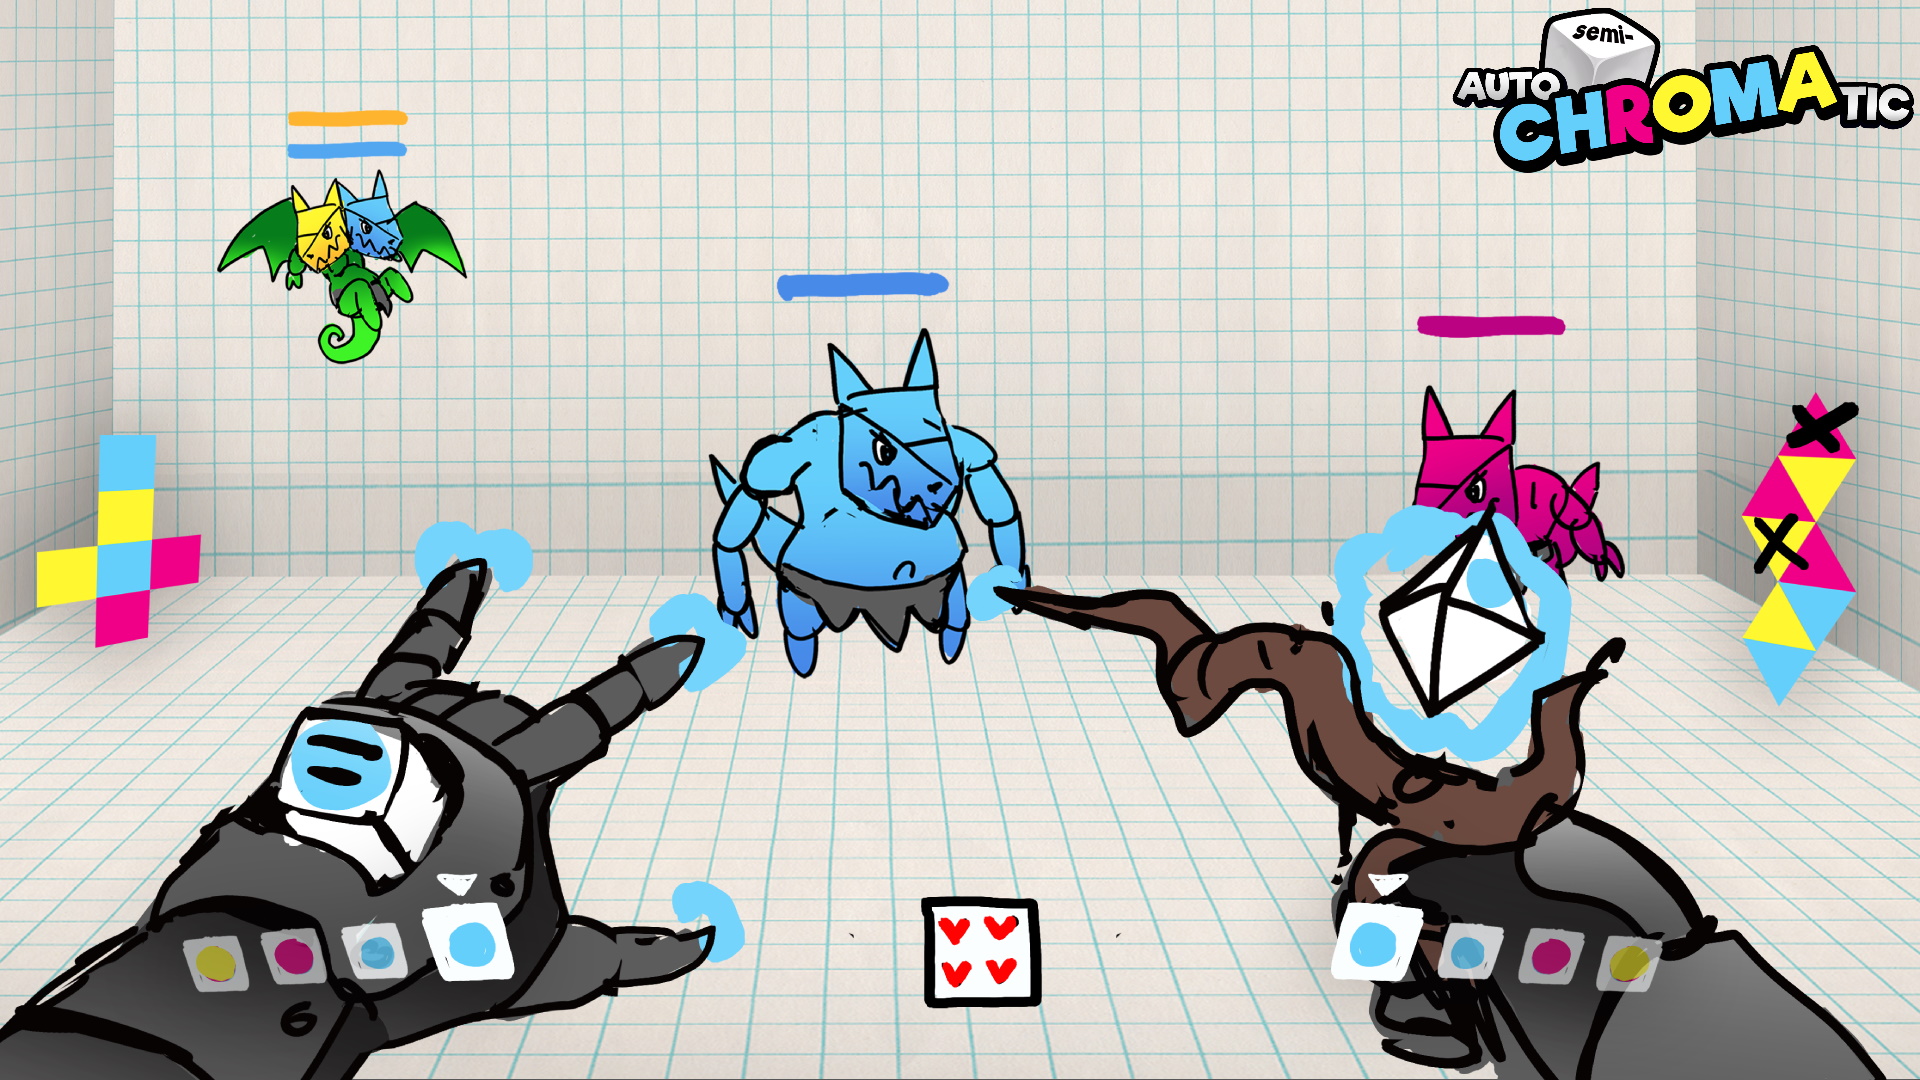 Concept art showing ideas for the cyan enemy, magenta enemy, and a combined cyan/yellow enemy with a two heads and a green body. The final project's UI layout can be seen, with two hands in the bottom corners, upcoming ammo types, 3D shape nets, and a health die shown. The game logo can be seen in the top right.